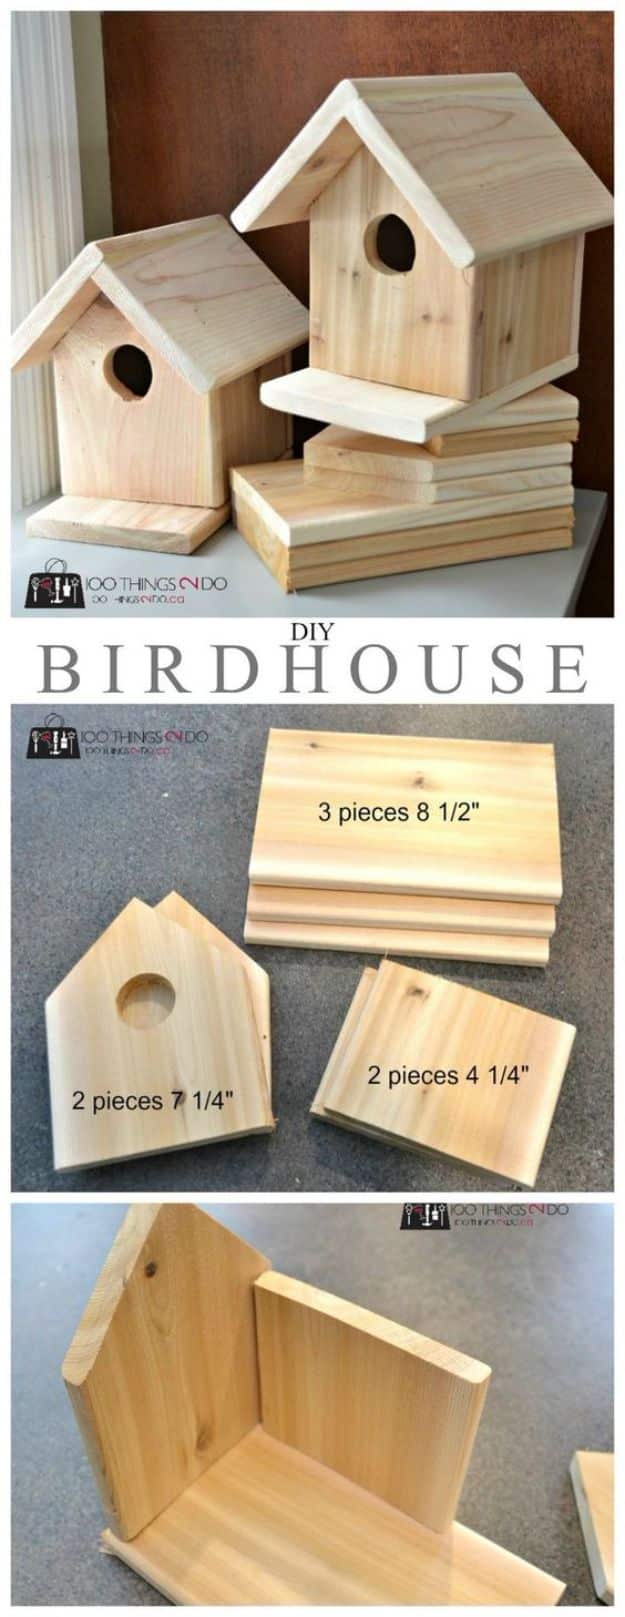 DIY Bird Houses - DIY Cedar Birdhouse - Easy Bird House Ideas for Kids and Adult To Make - Free Plans and Tutorials for Wooden, Simple, Upcyle Designs, Recycle Plastic and Creative Ways To Make Rustic Outdoor Decor and a Home for the Birds - Fun Projects for Your Backyard This Summer 